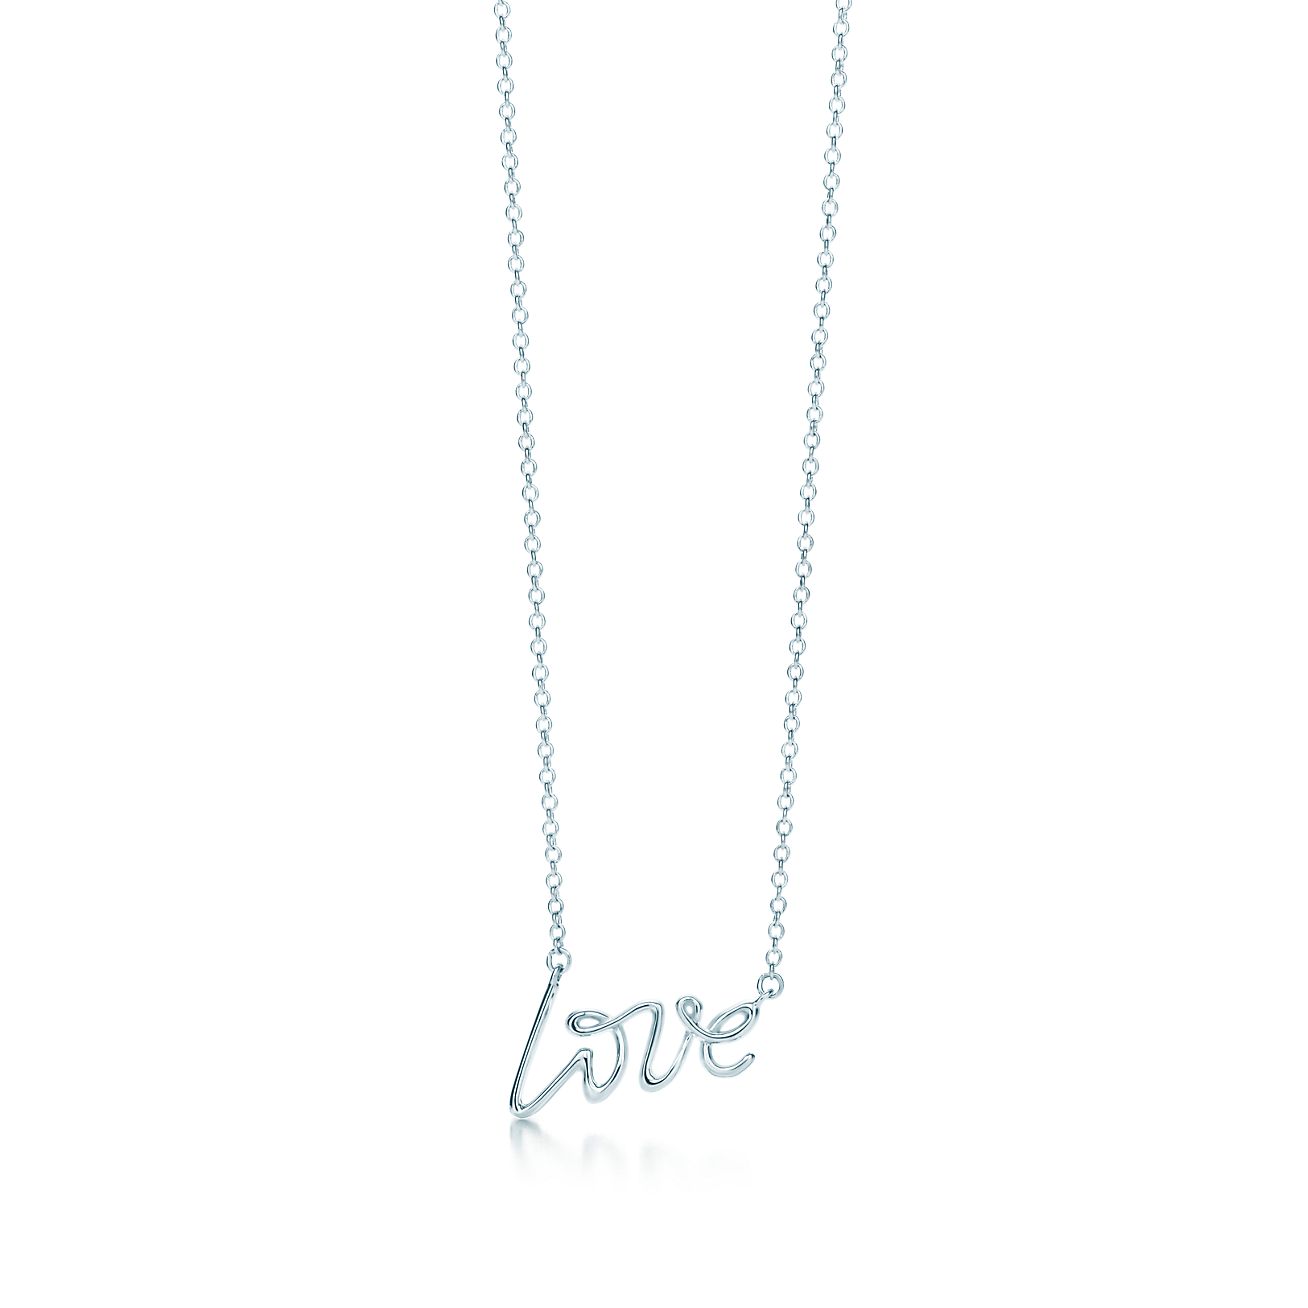 tiffany love necklace gold